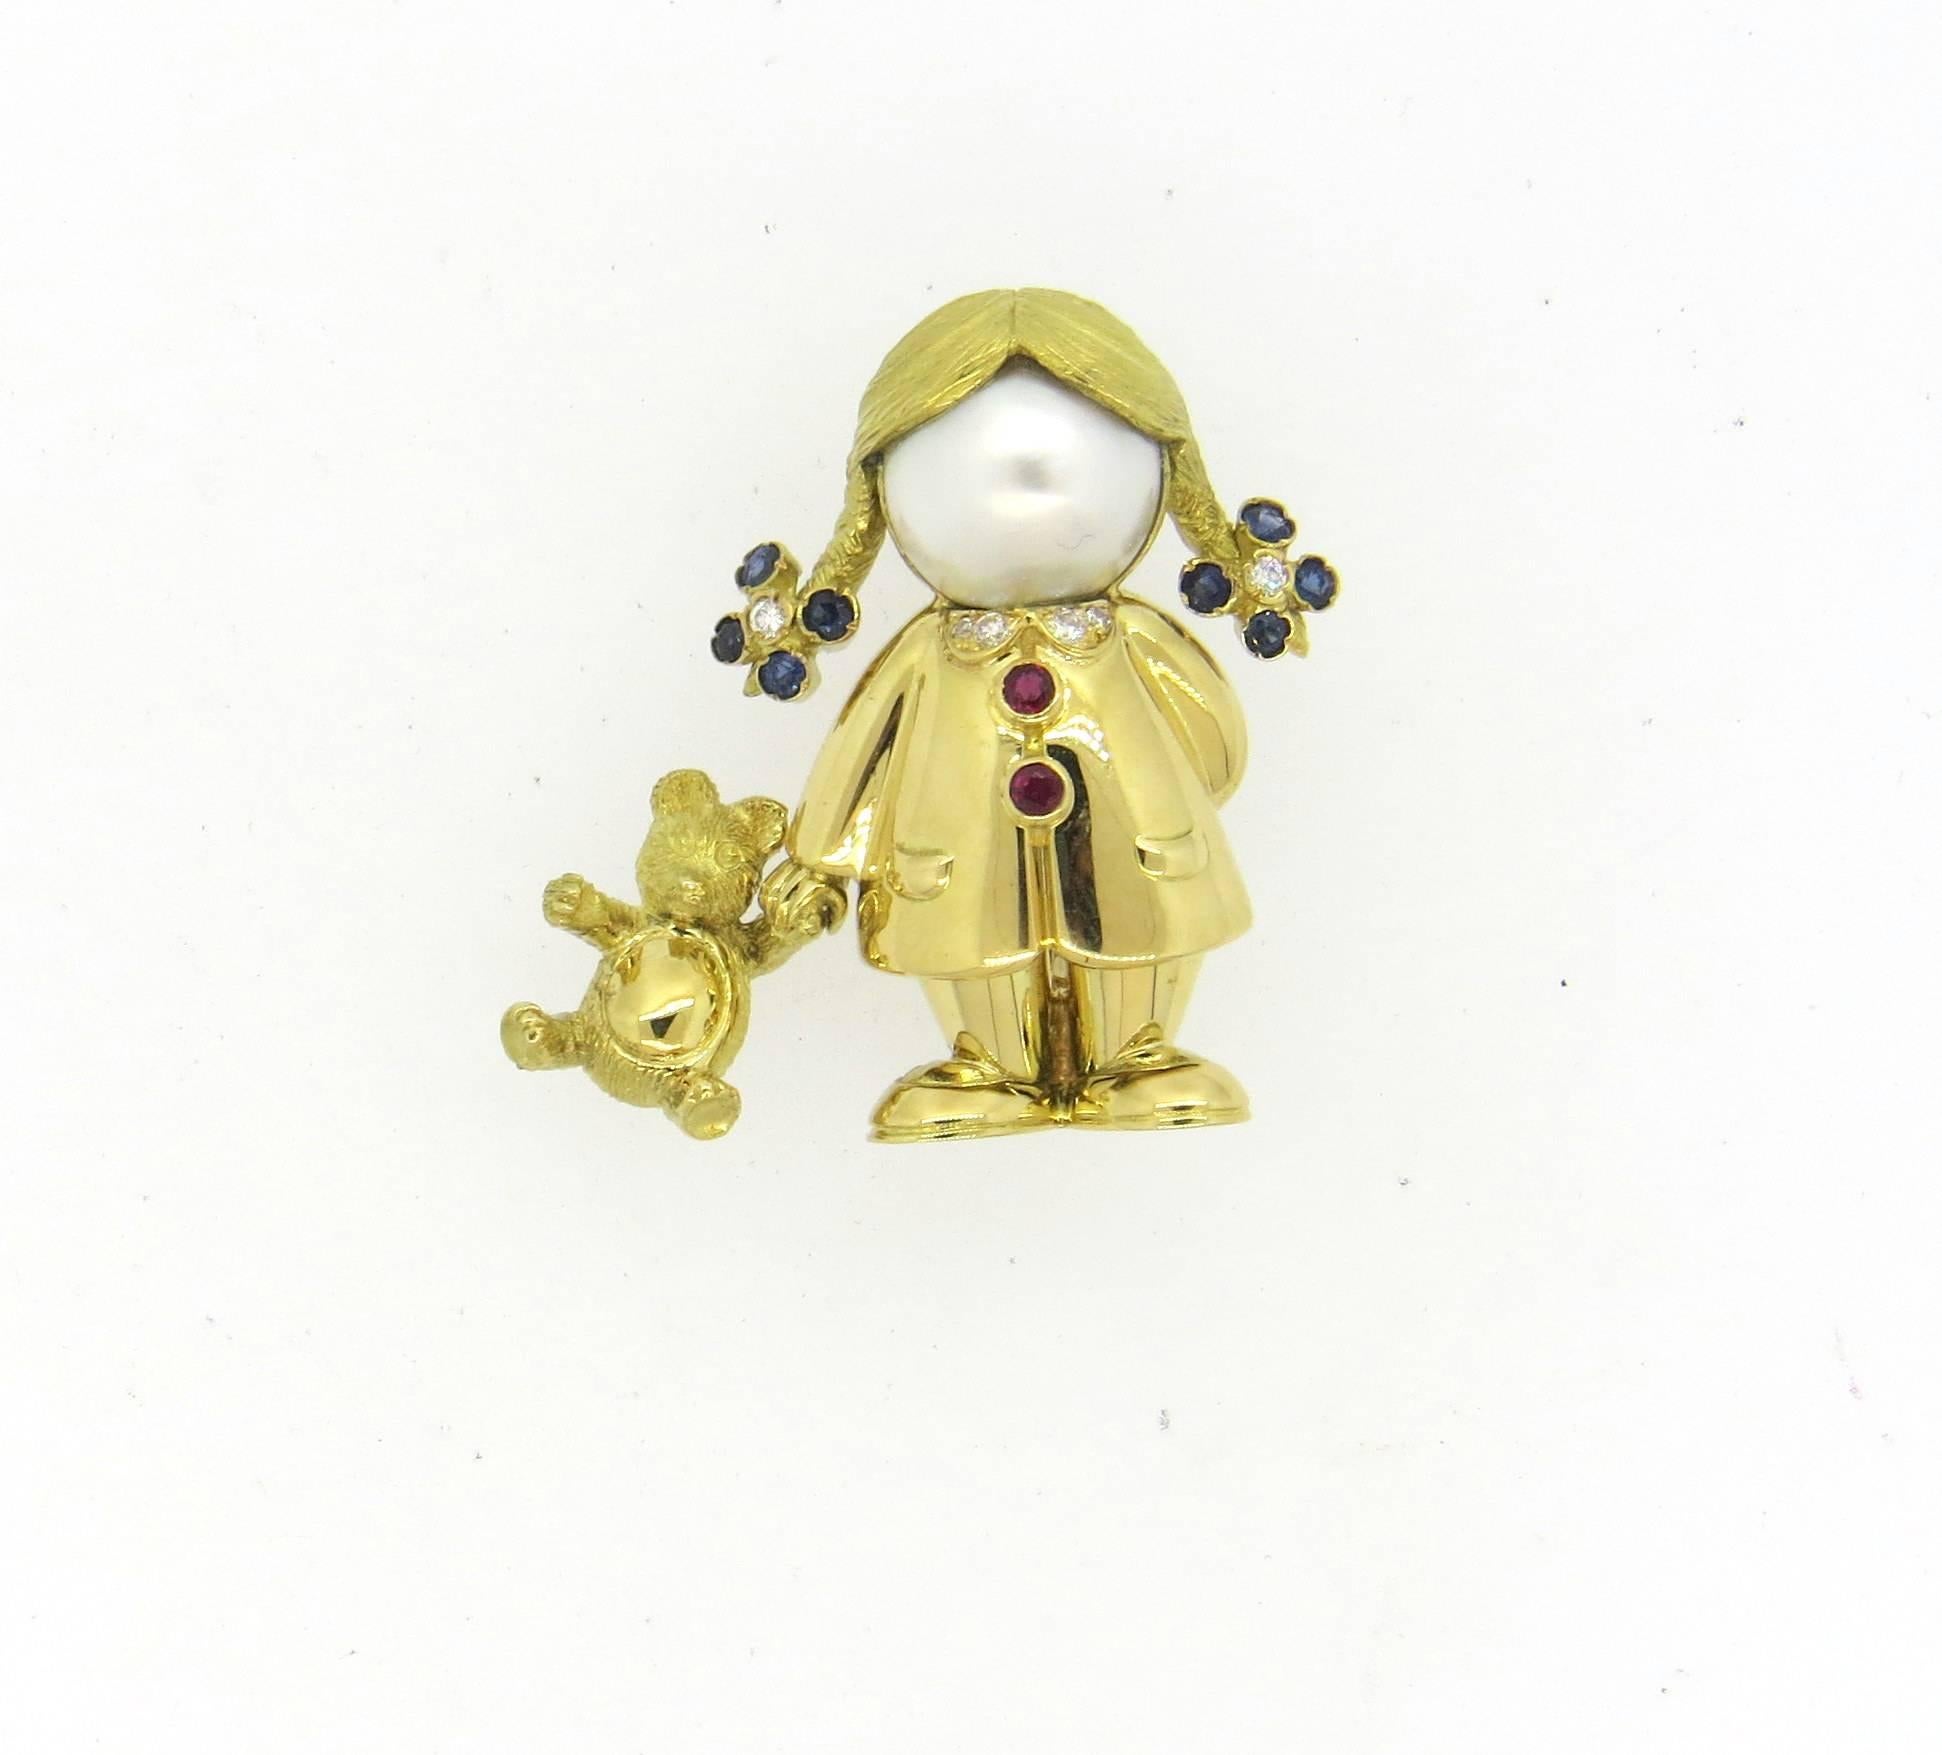 Adorable 18k gold brooch, crafted by Fred Paris, depicting a girl hold a teddy bear, decorated with diamonds, sapphires, rubies and mabe pearl. Brooch measures 30mm x 27mm. Marked: Fred Paris, or750. Weight of the piece - 15.4 grams 